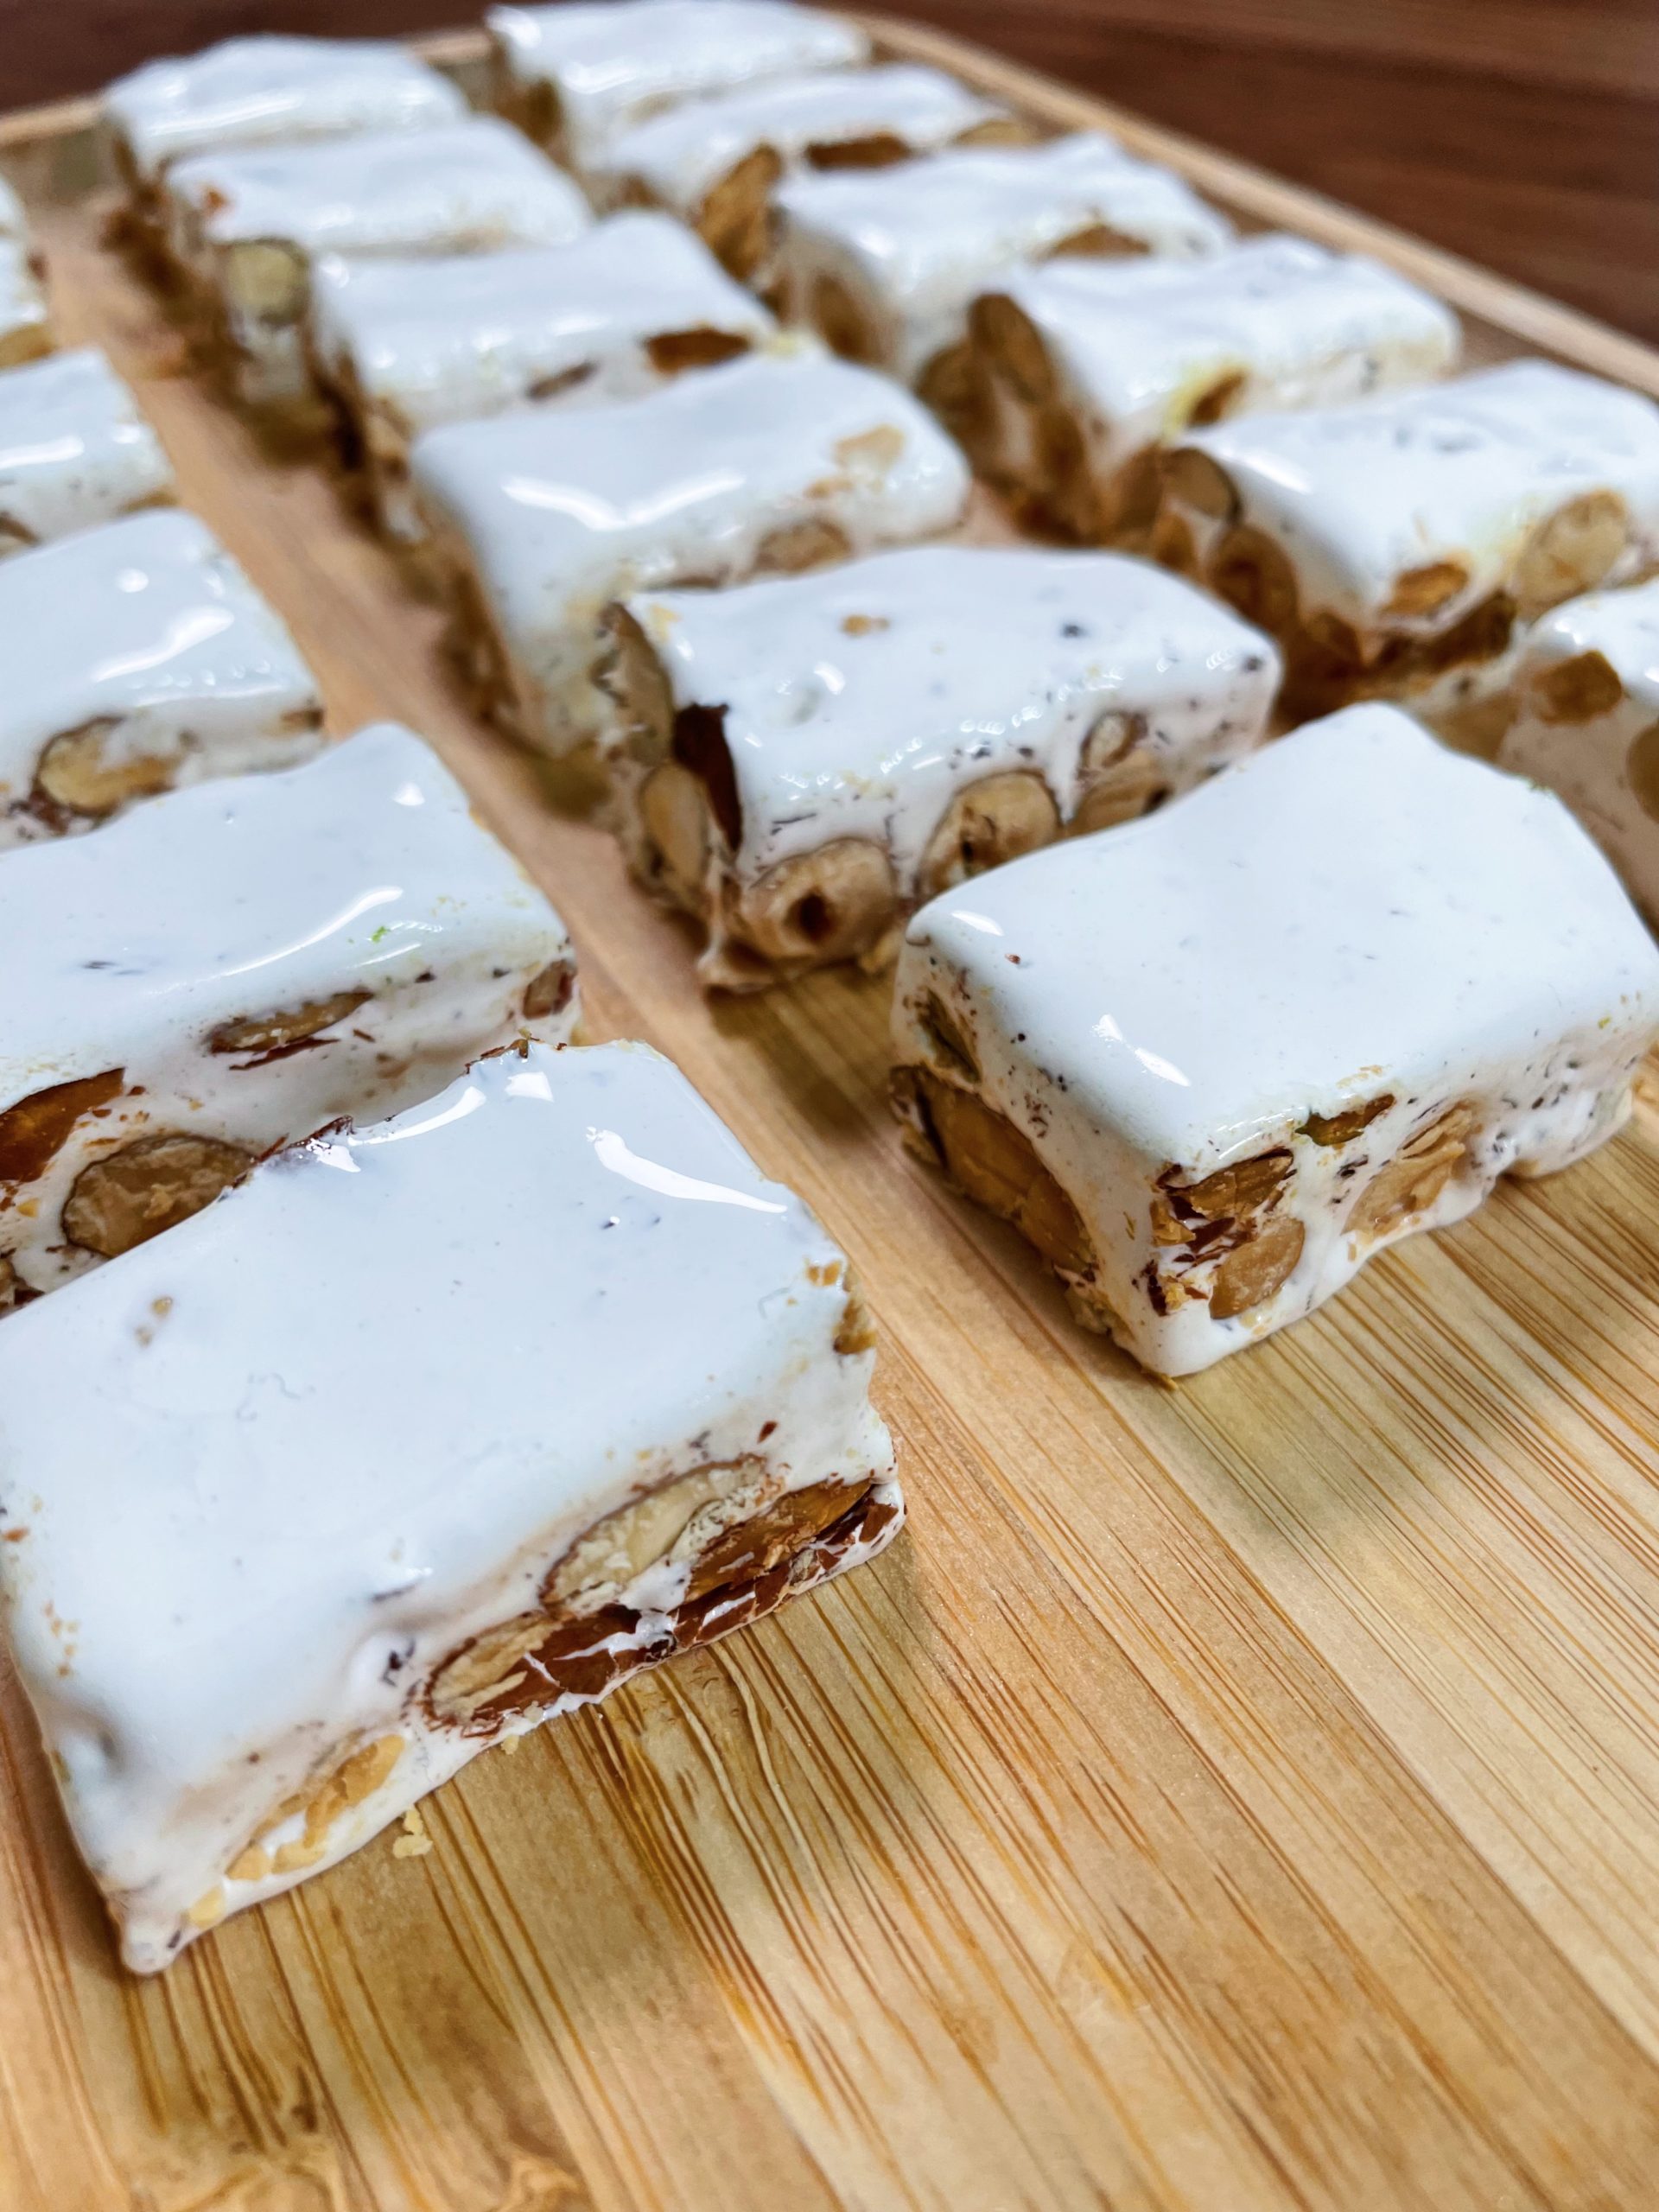 https://www.cookandrecord.com/wp-content/uploads/2021/11/recette-nougat-cook-and-record-scaled.jpg